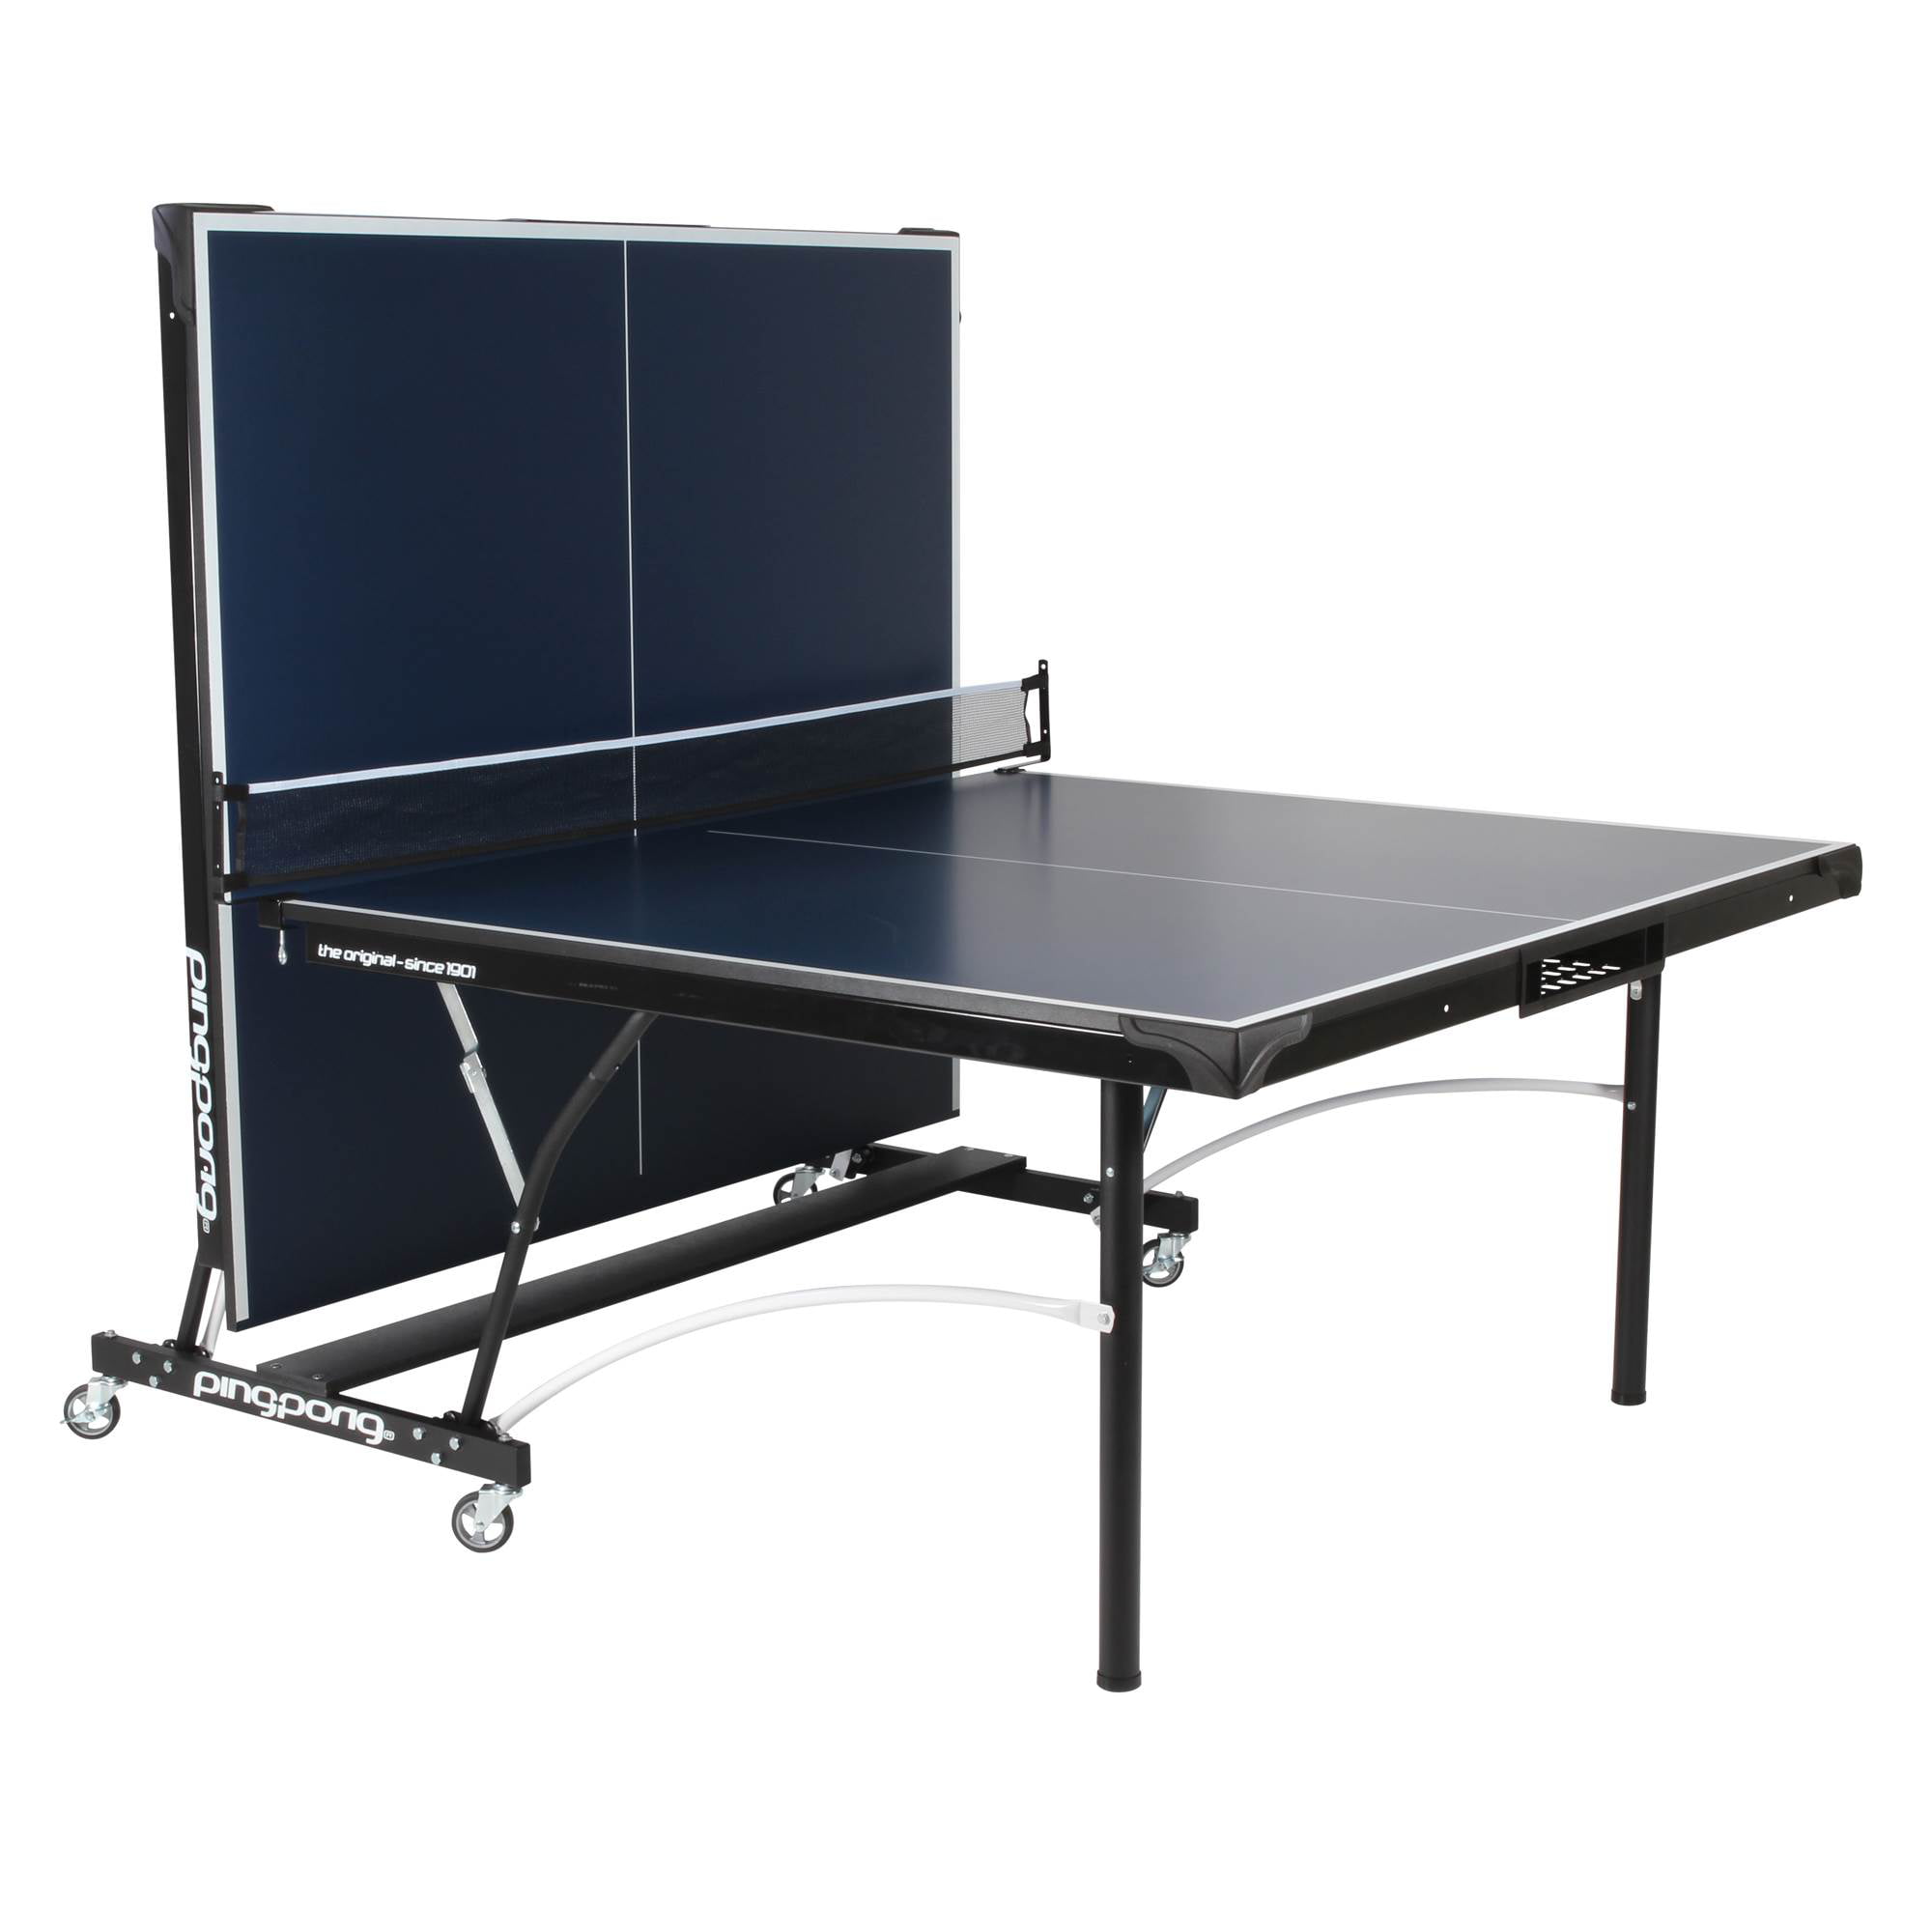 Ping Pong Fury Regulation Size Tennis Table W/ 4 Rackets and 6 Ping Po –  Tuesday Morning